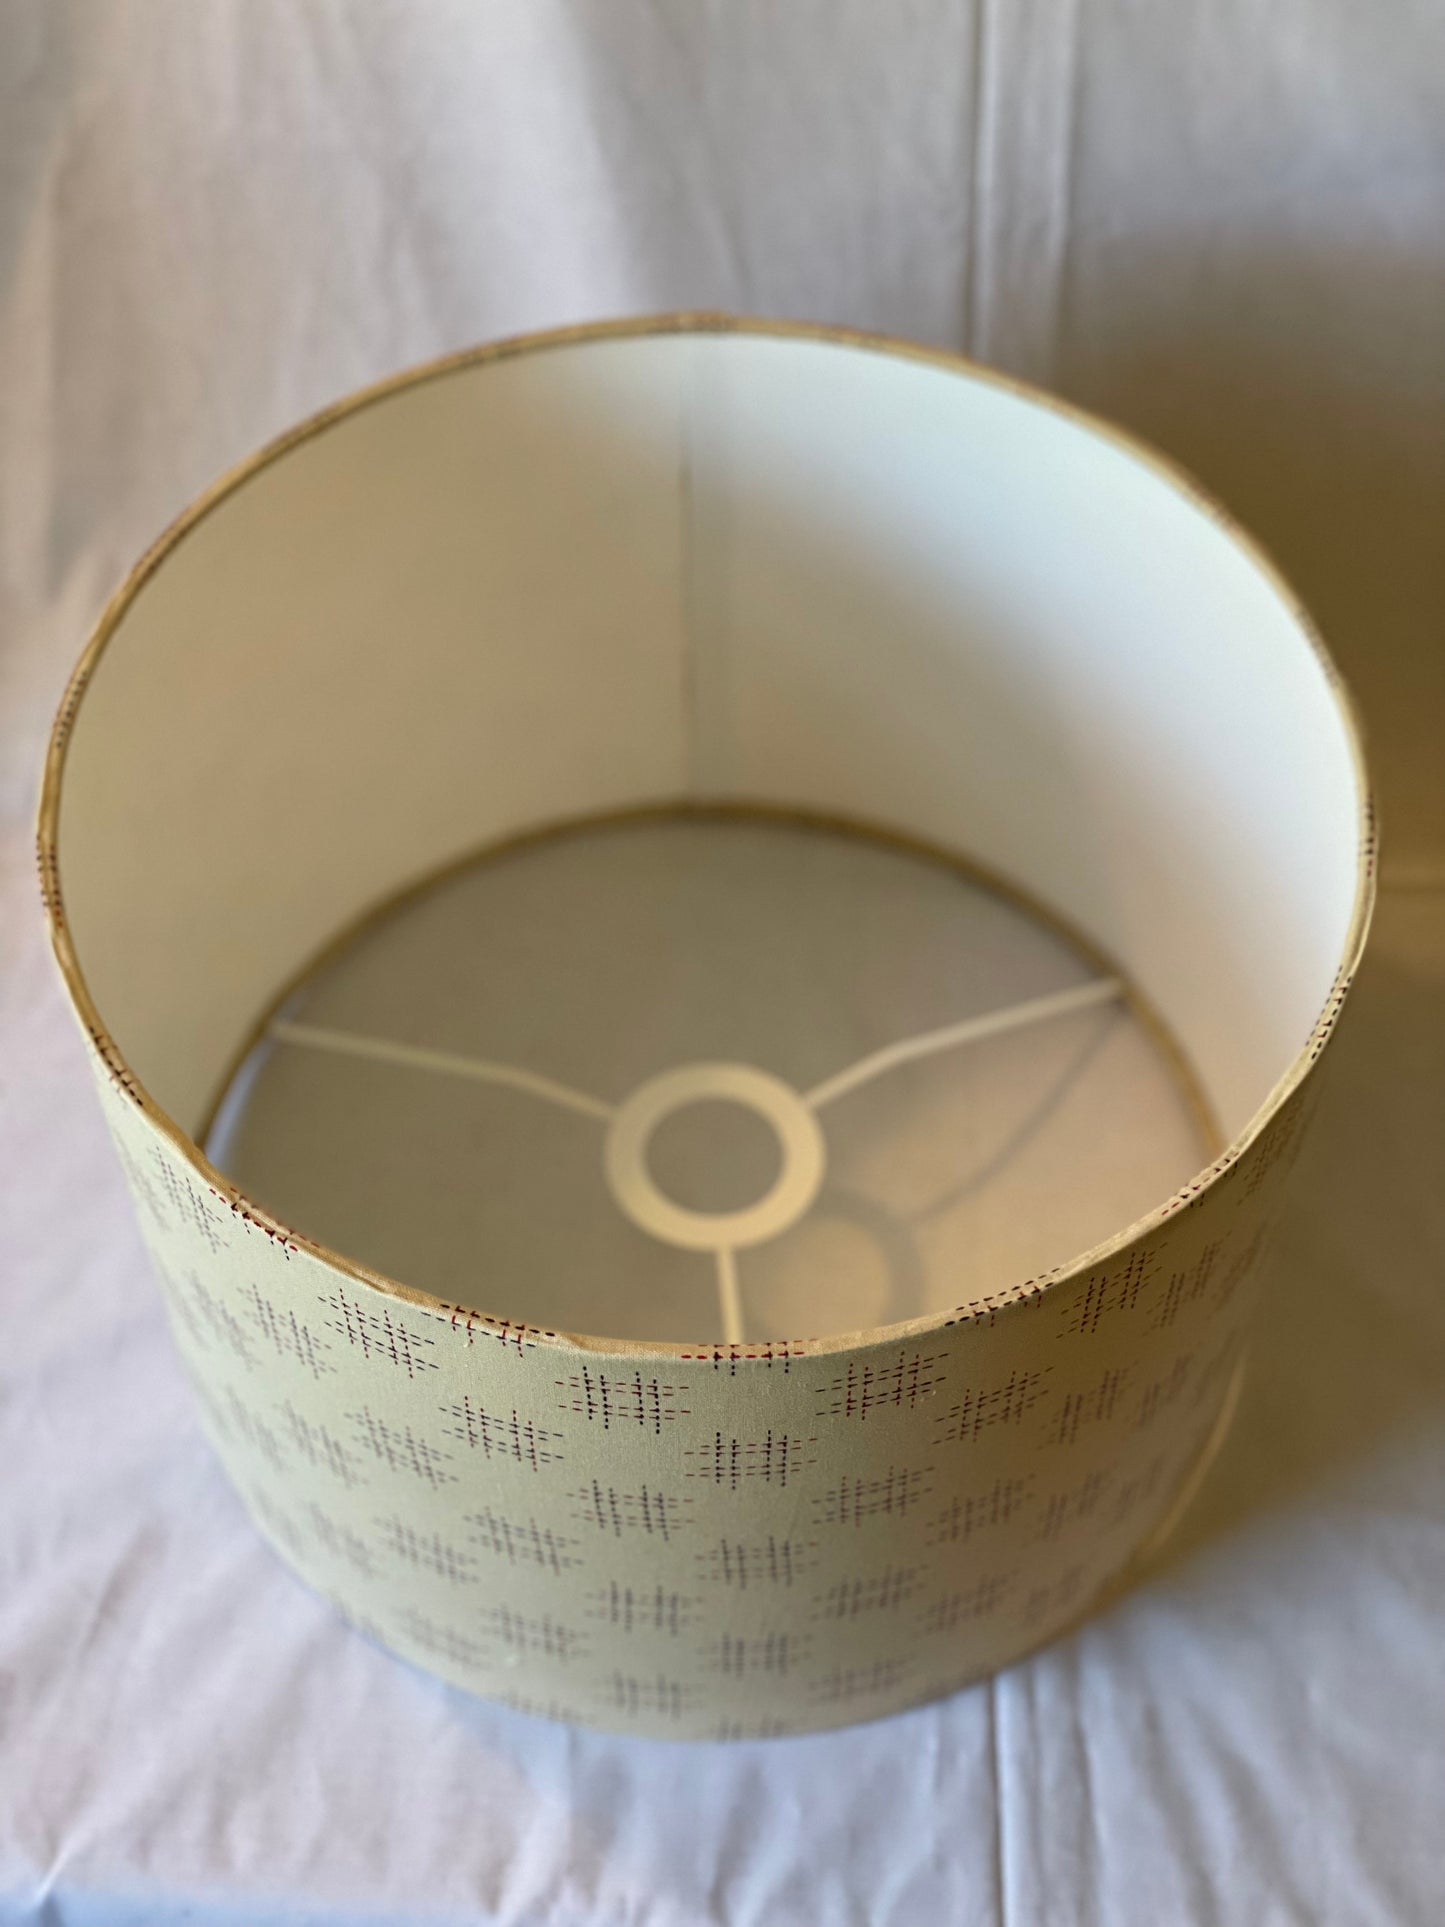 12 Inch Drum Shade. Traditional Japanese Design. Parchment with Maroon Hashtag Motif.